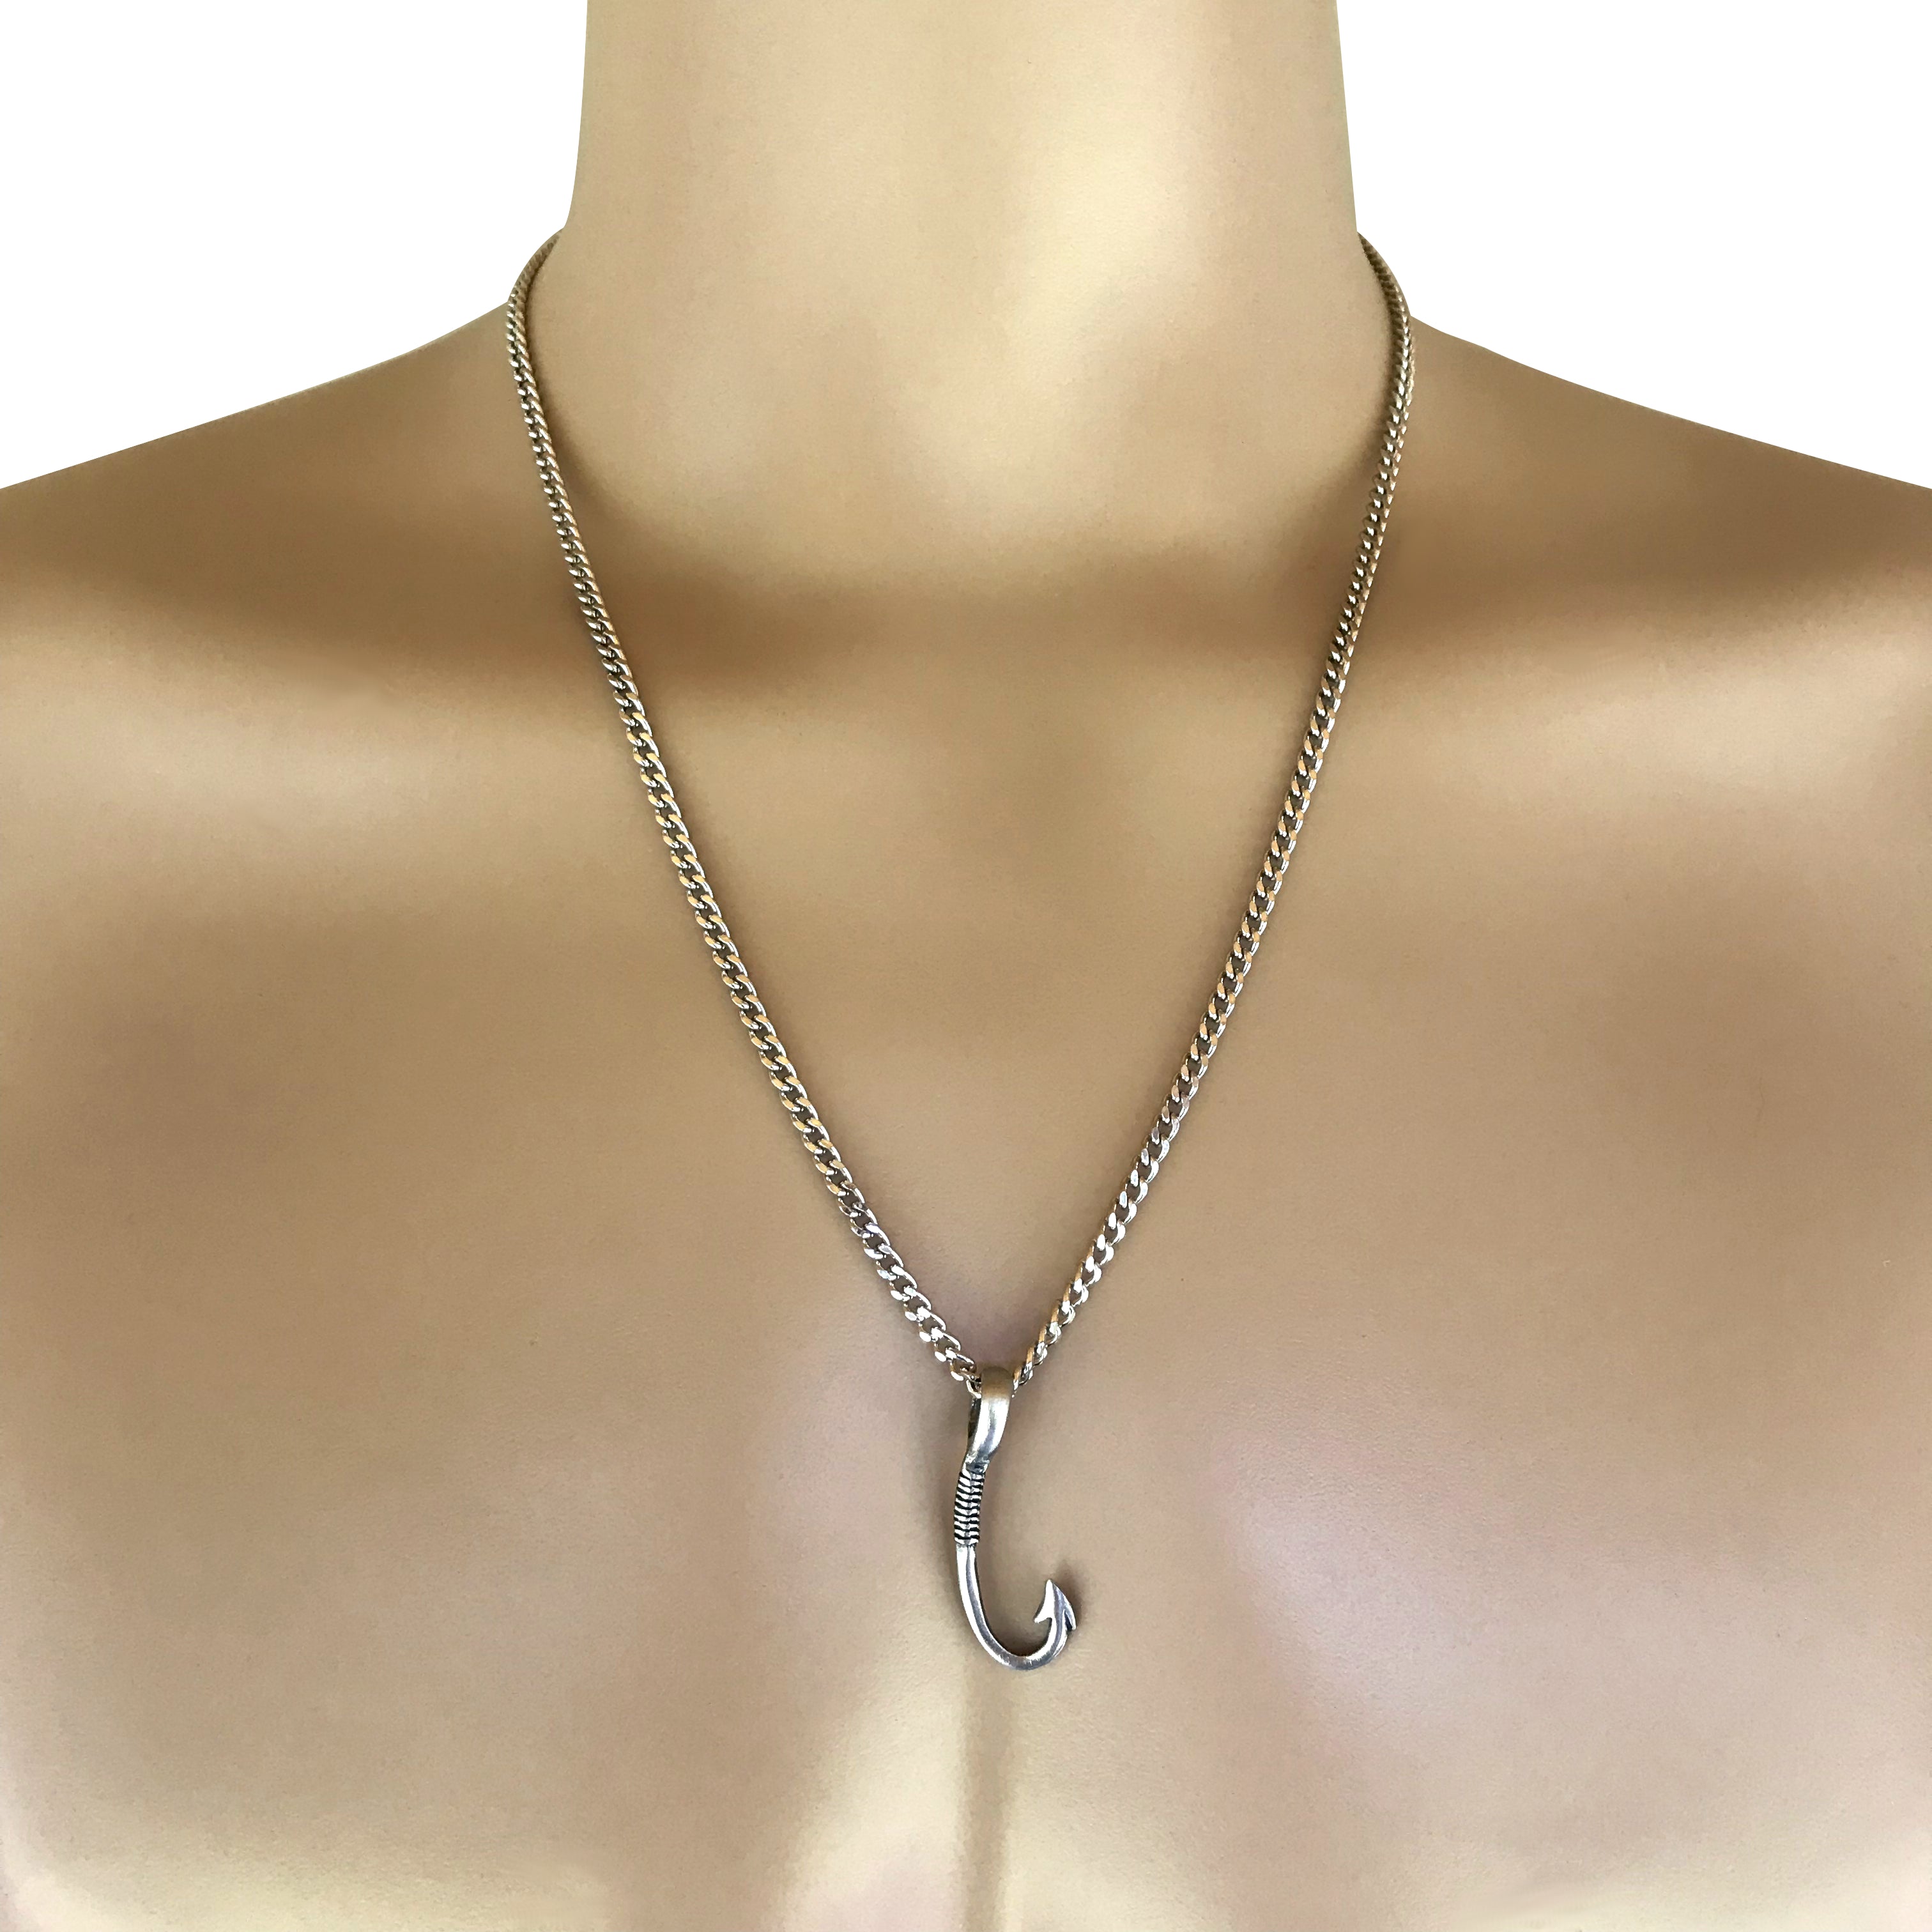 Buy Stainless Steel Maori Hook Necklace, Hei Matau, Maori Fish Hook Necklace  for Men, Men's Jewelry Online in India - Etsy